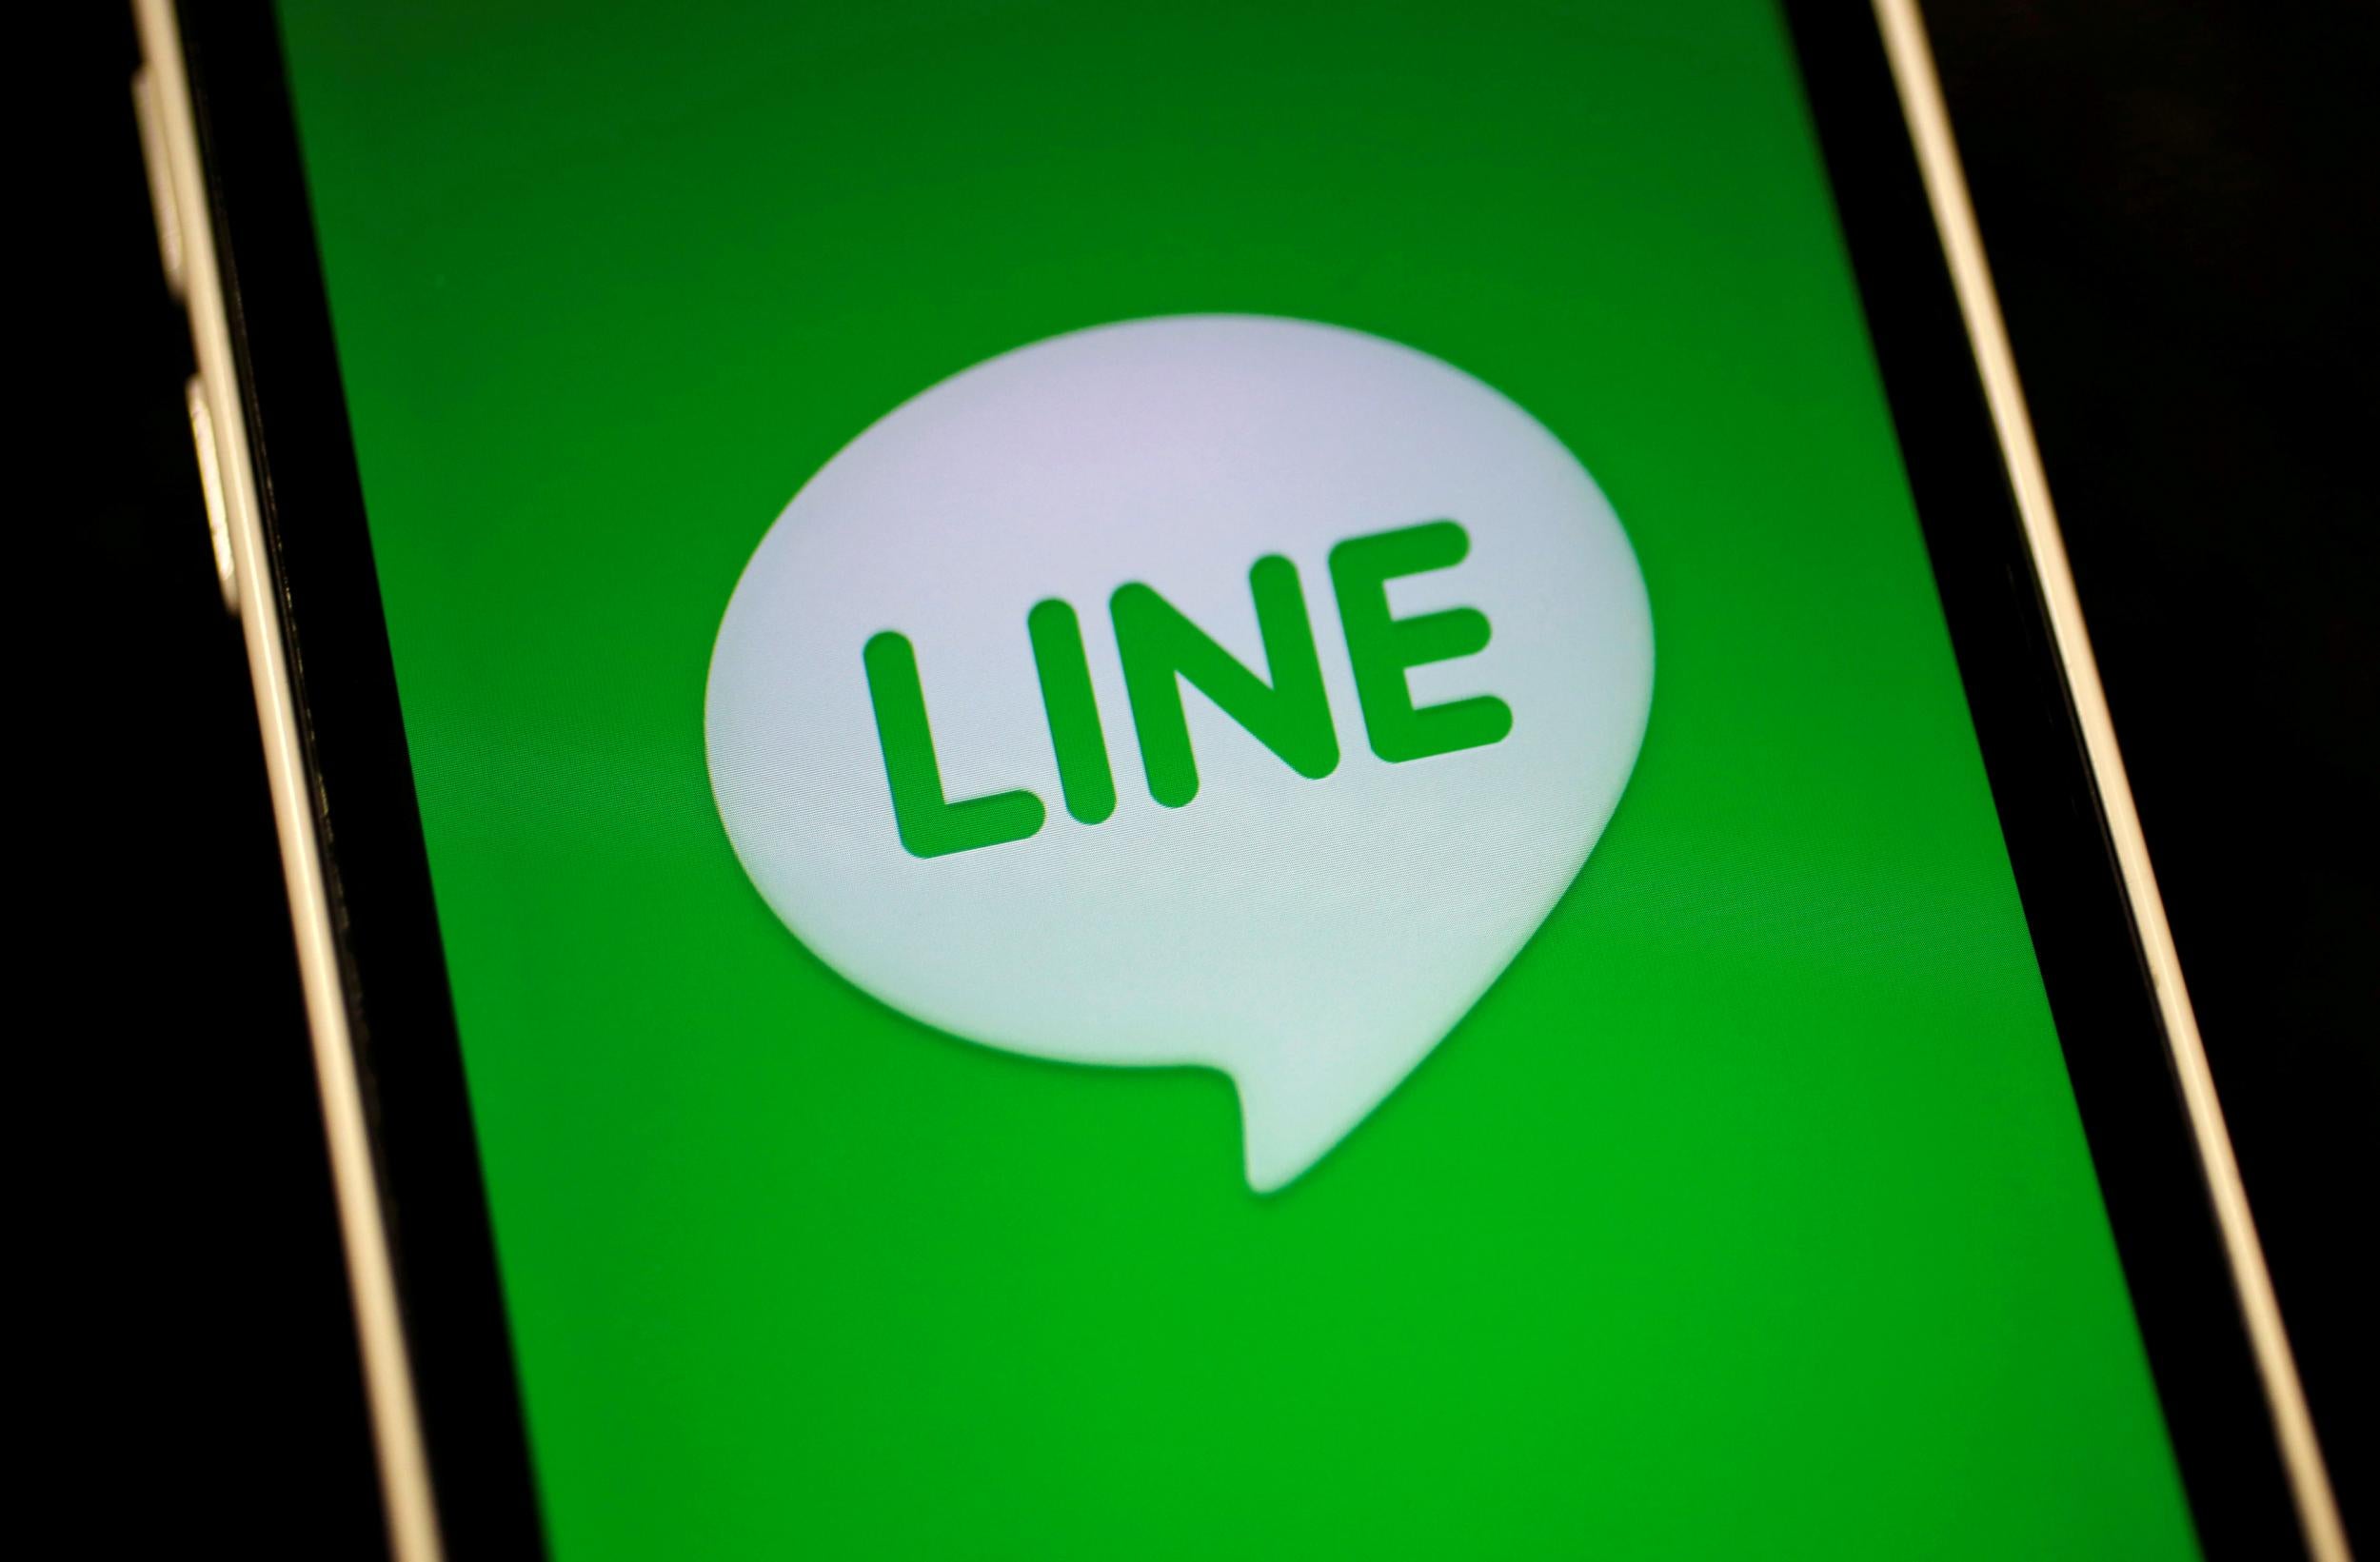 Line will roll out the new link cryptocurrency to users of its messaging app